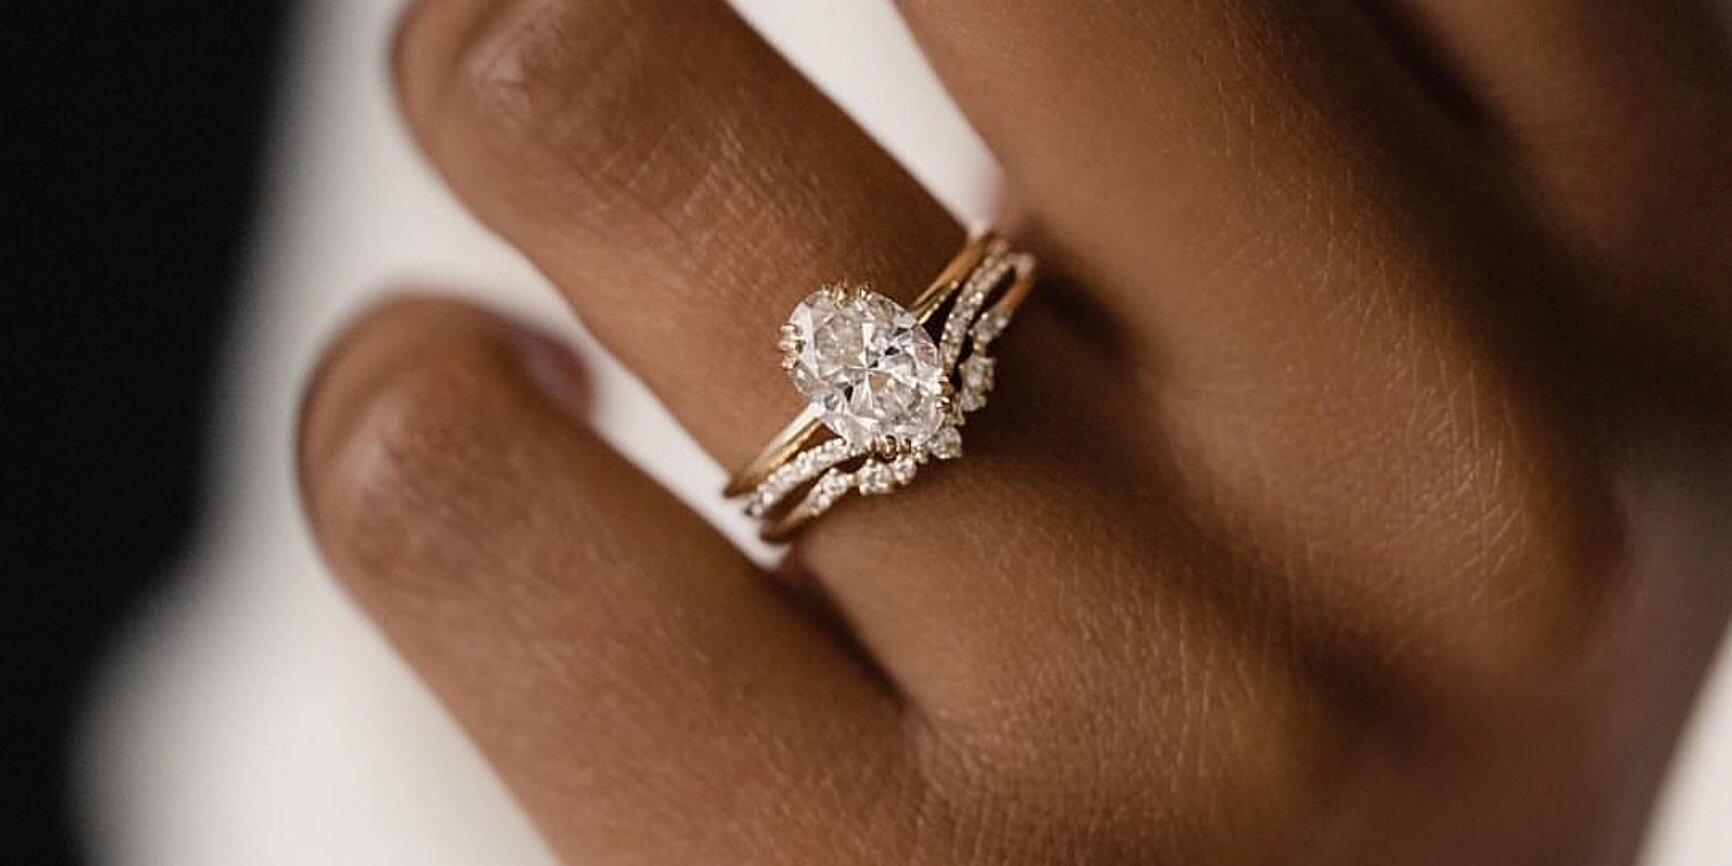 Get your love partner the new ready to ship engagement rings